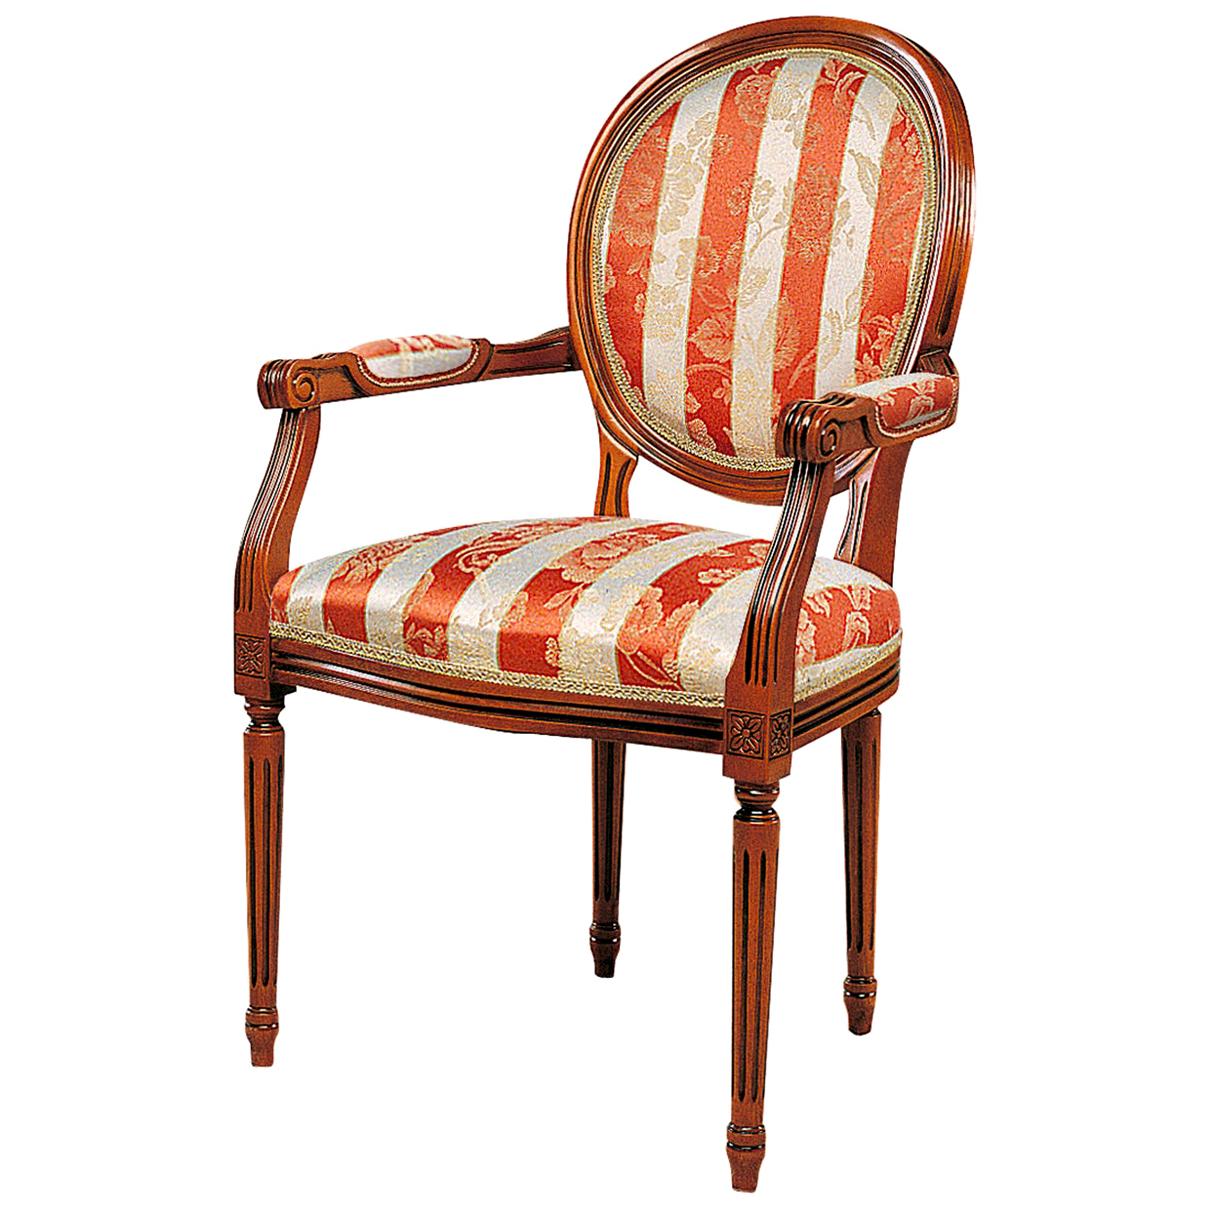 Red Striped Chair with Armrests